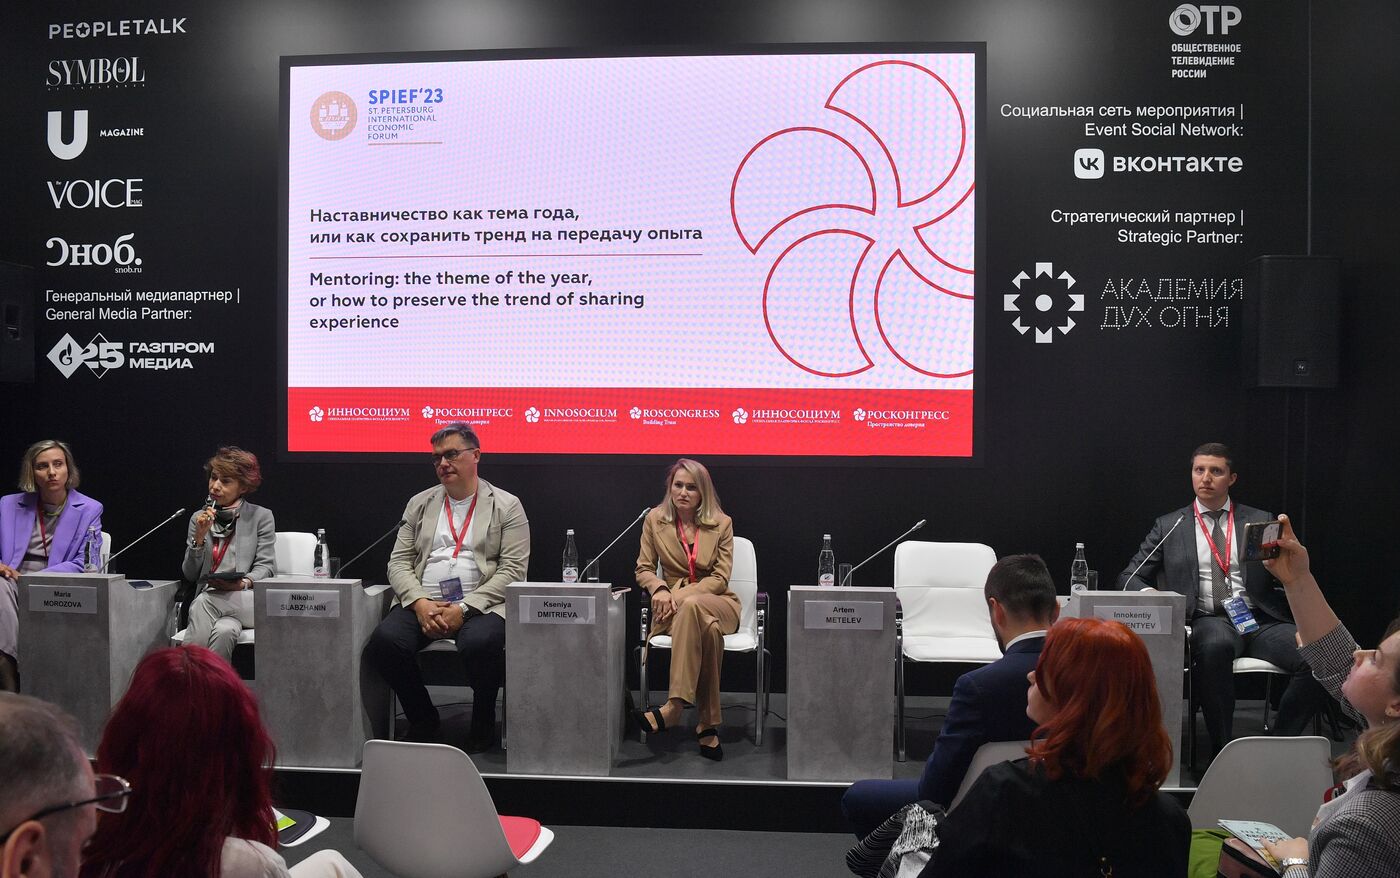 SPIEF-2023. Mentoring: The Theme of the Year, or How to Preserve the Trend of Sharing Experience